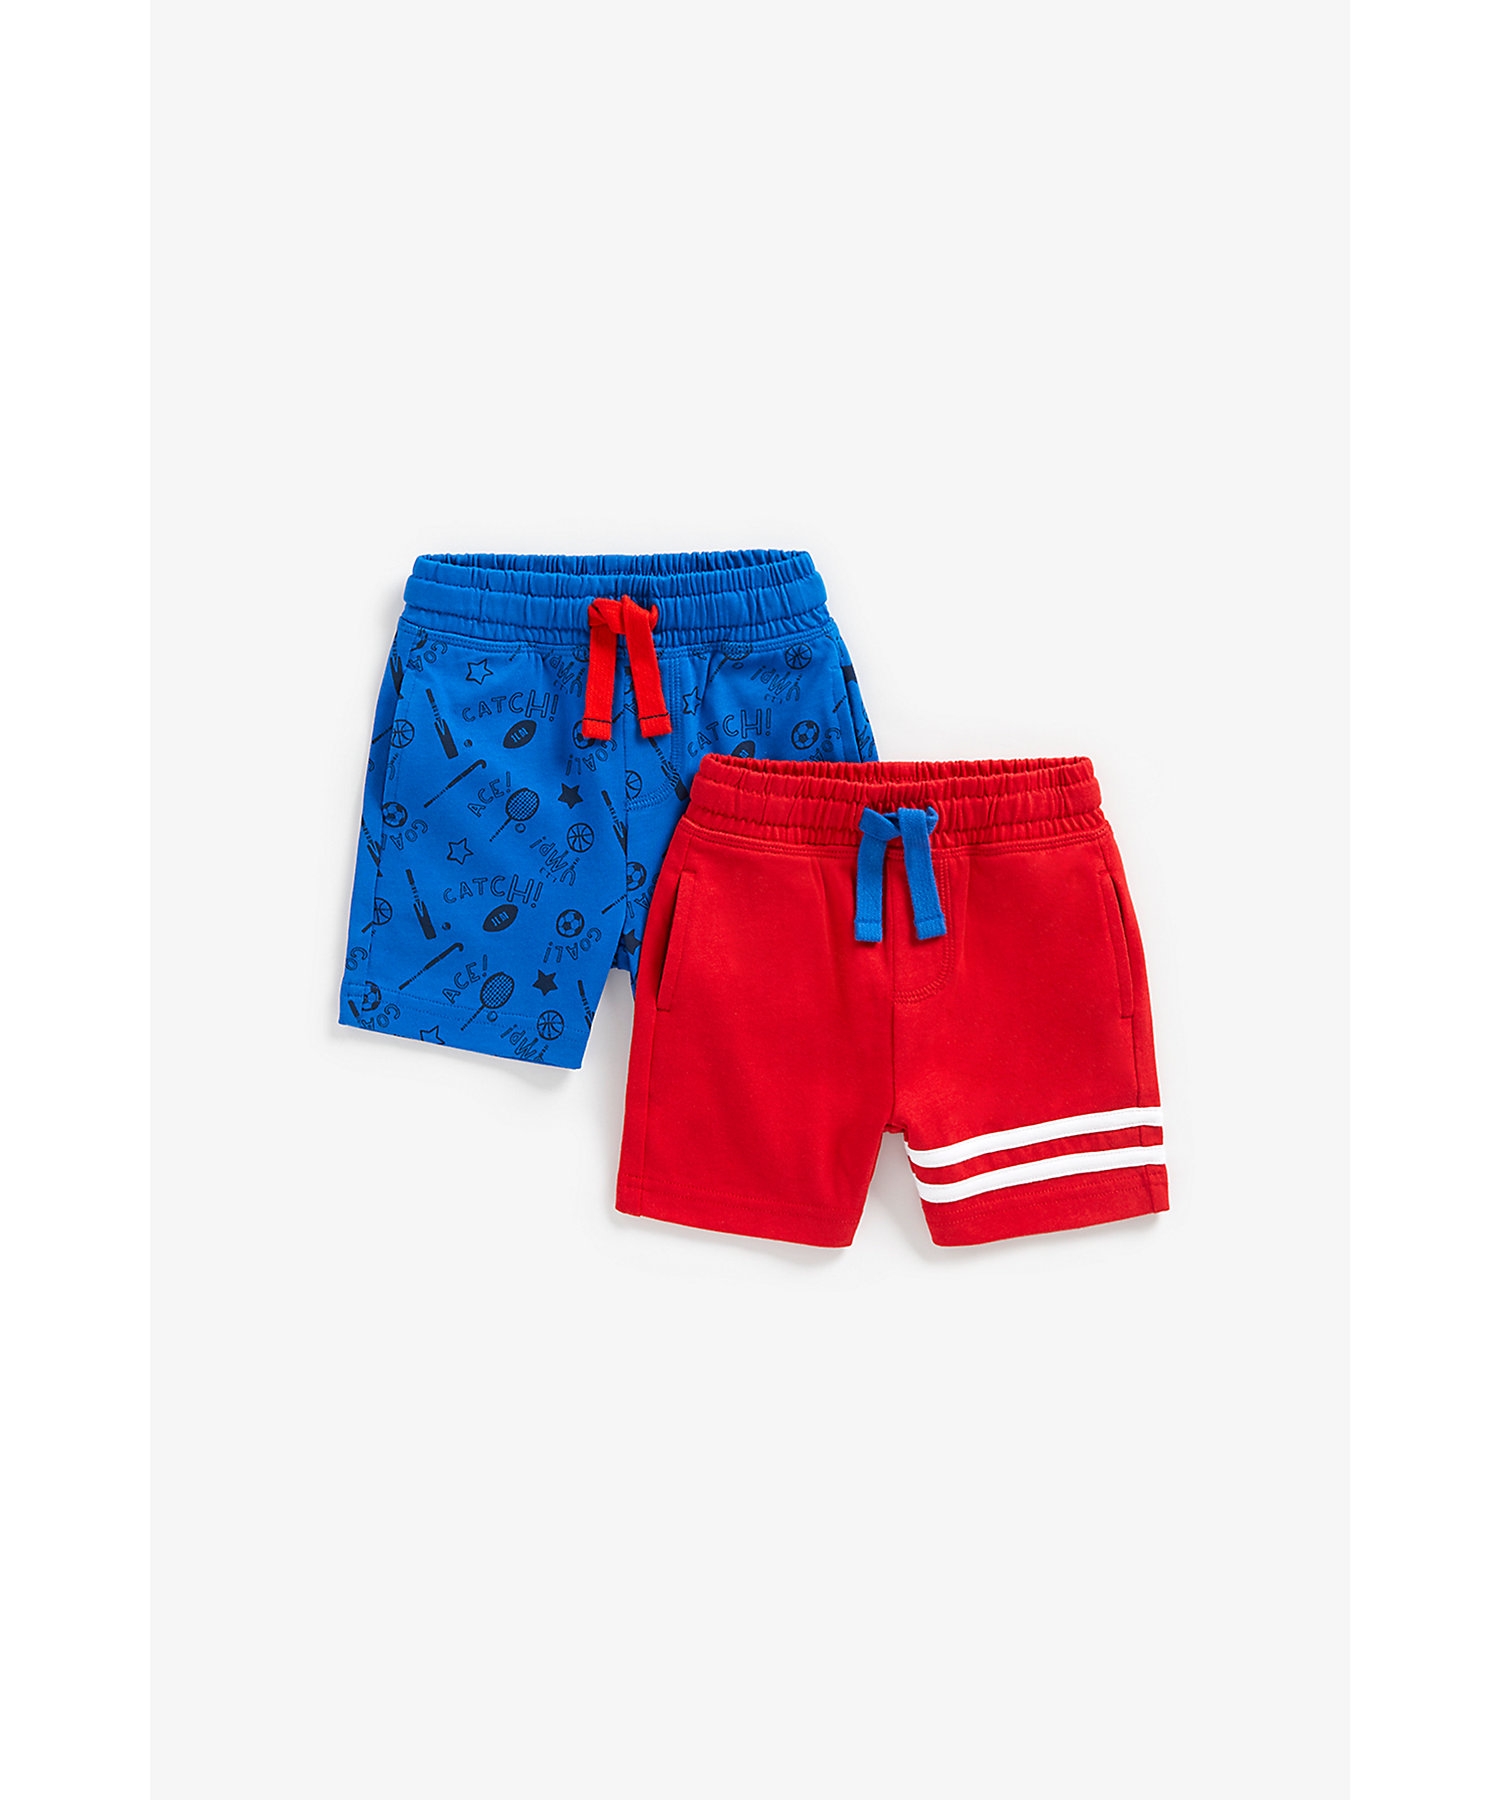 Boys Shorts -Pack of 2-Multicolor